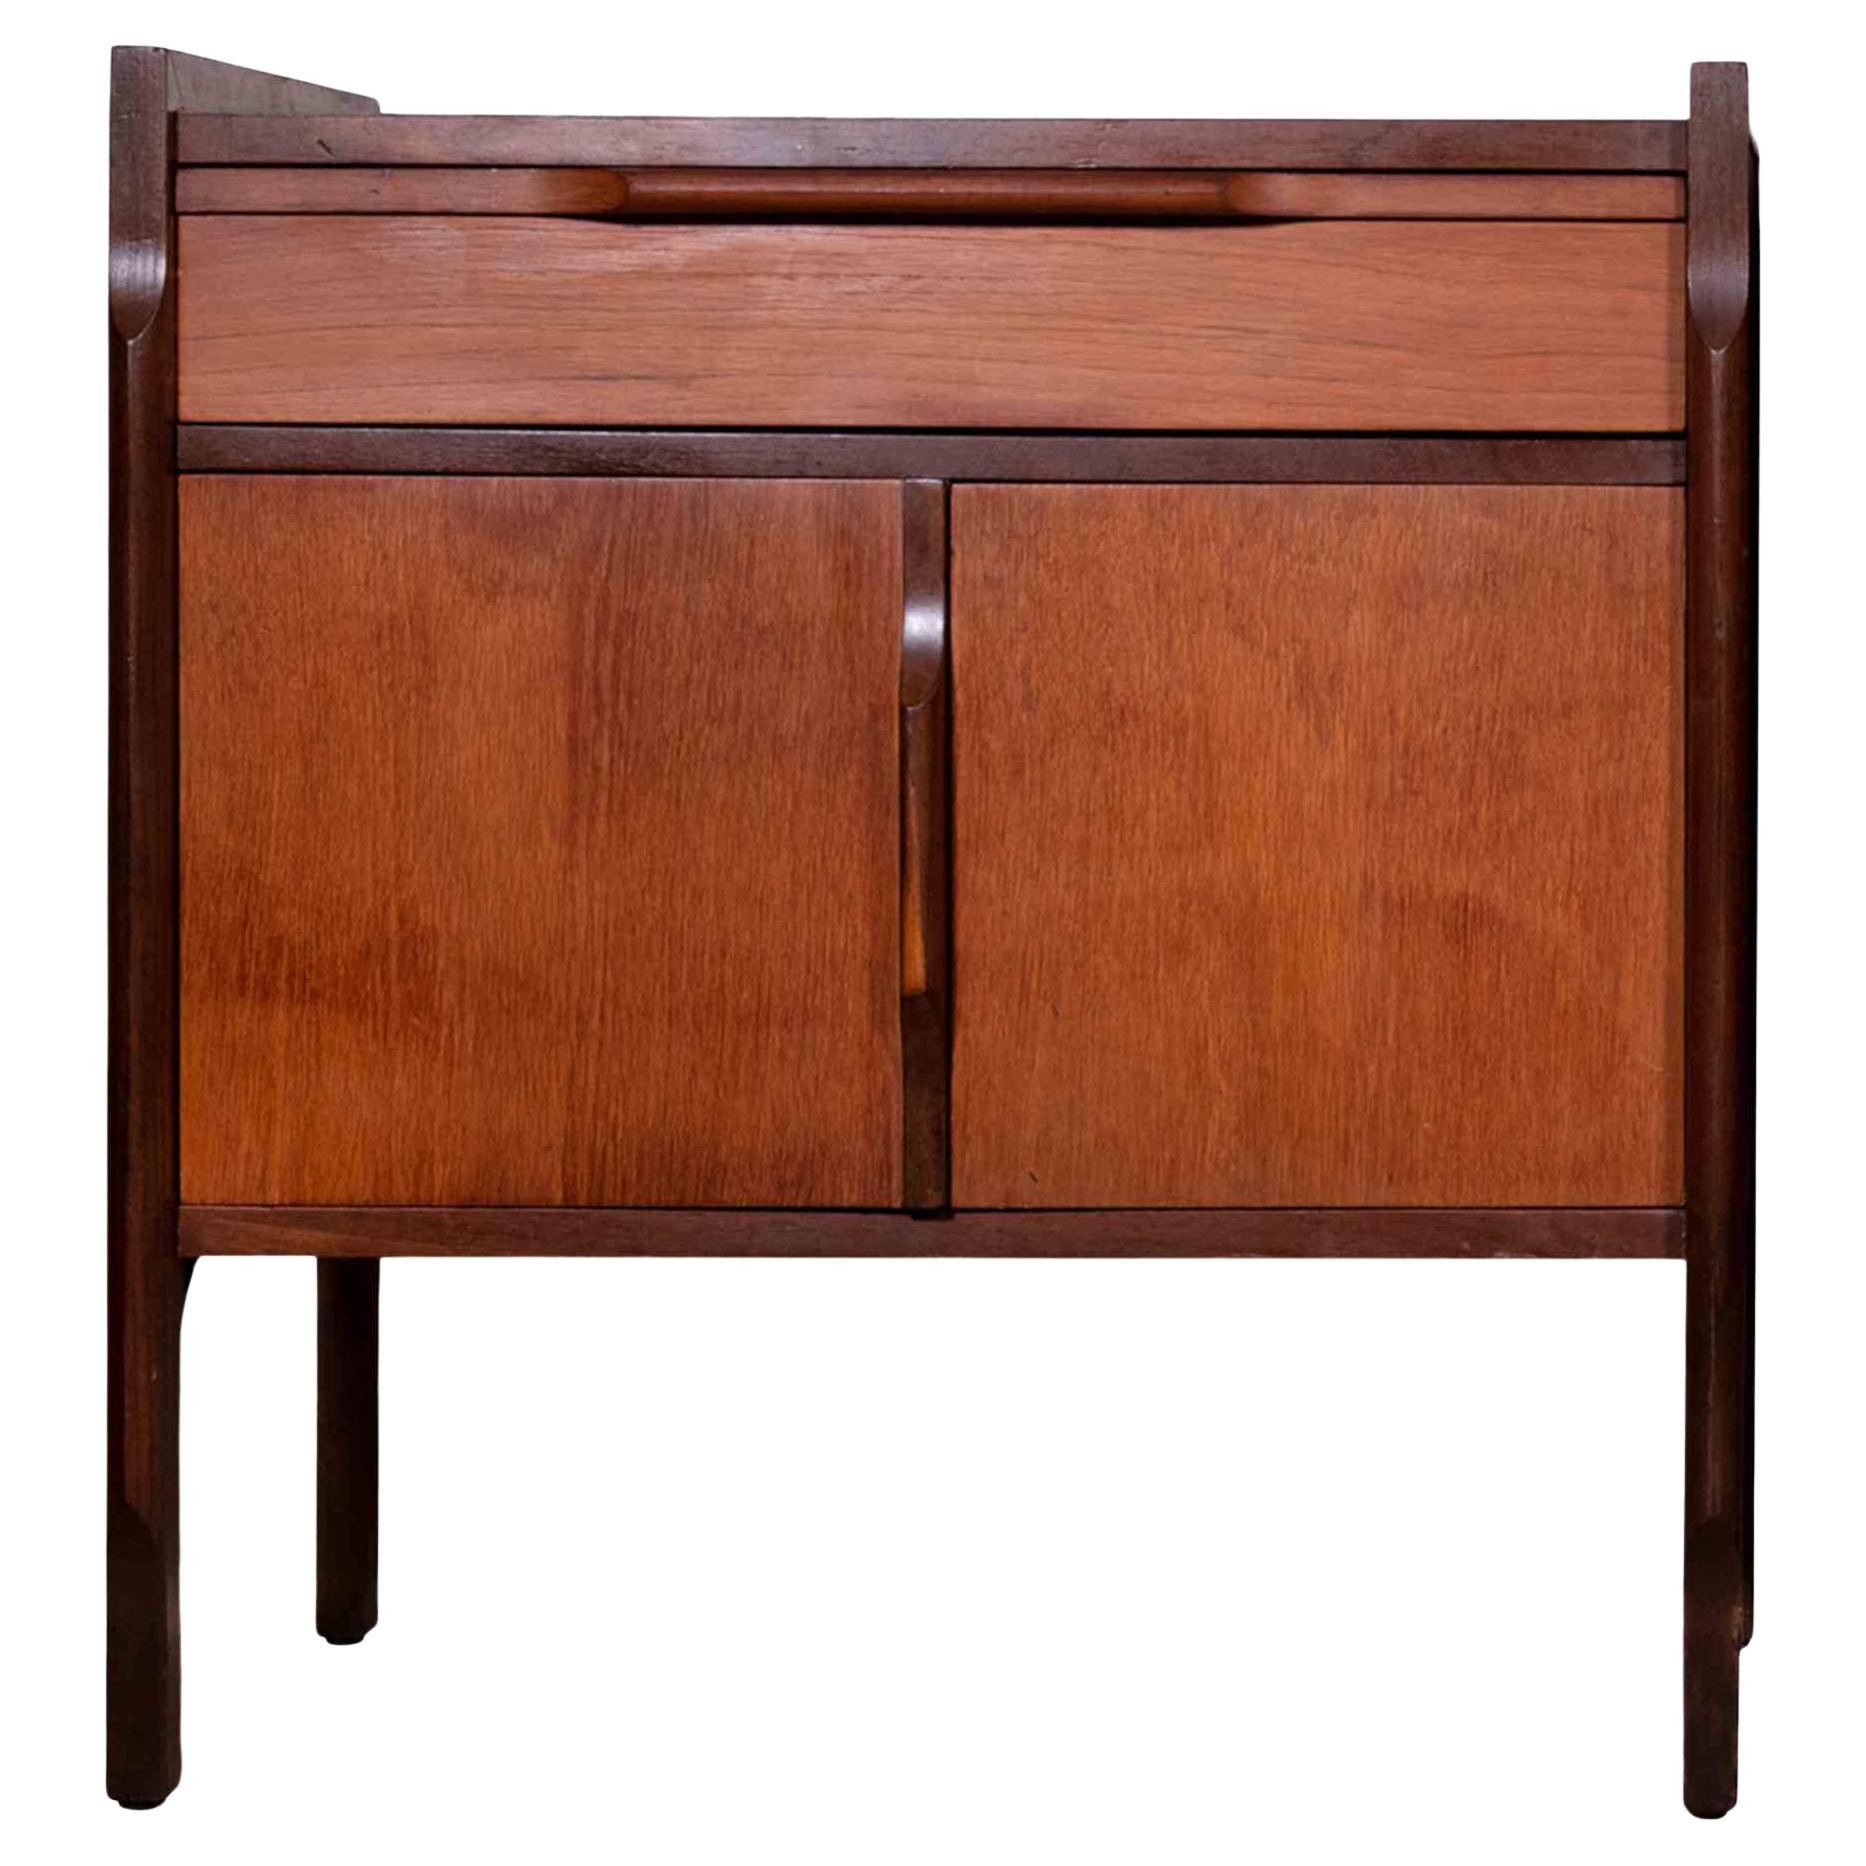 Pair of mid-century Italian wooden bedside tables is an original design furniture realized in Italy in the mid-20th century.

 A vintage bedside tables with two doors and a drawer each one. 

Collect a vintage design item and give a touch of